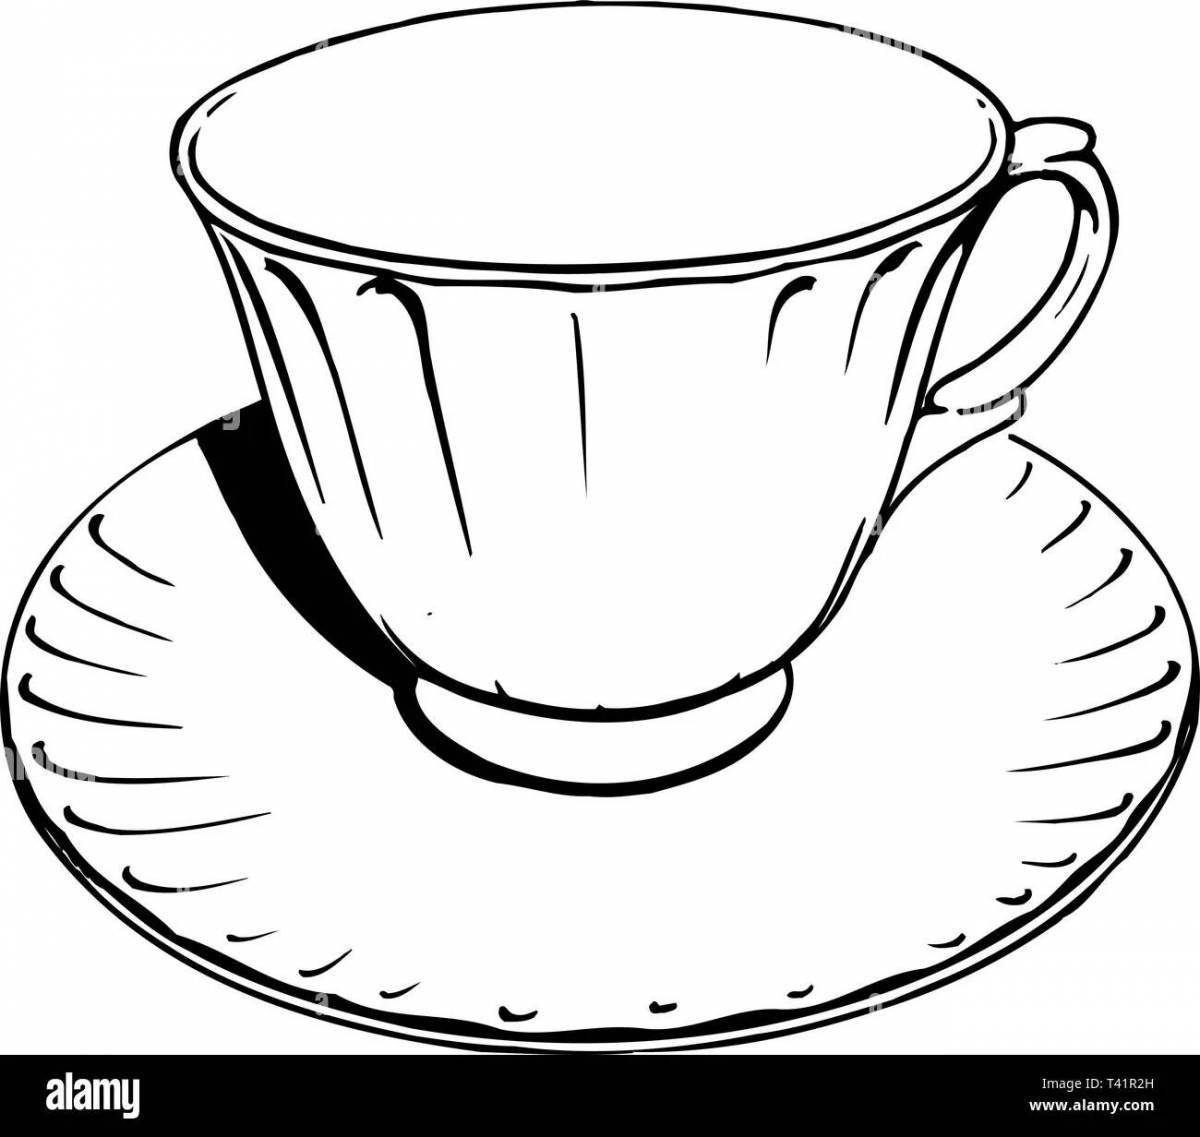 Glorious mug with saucer coloring book for children